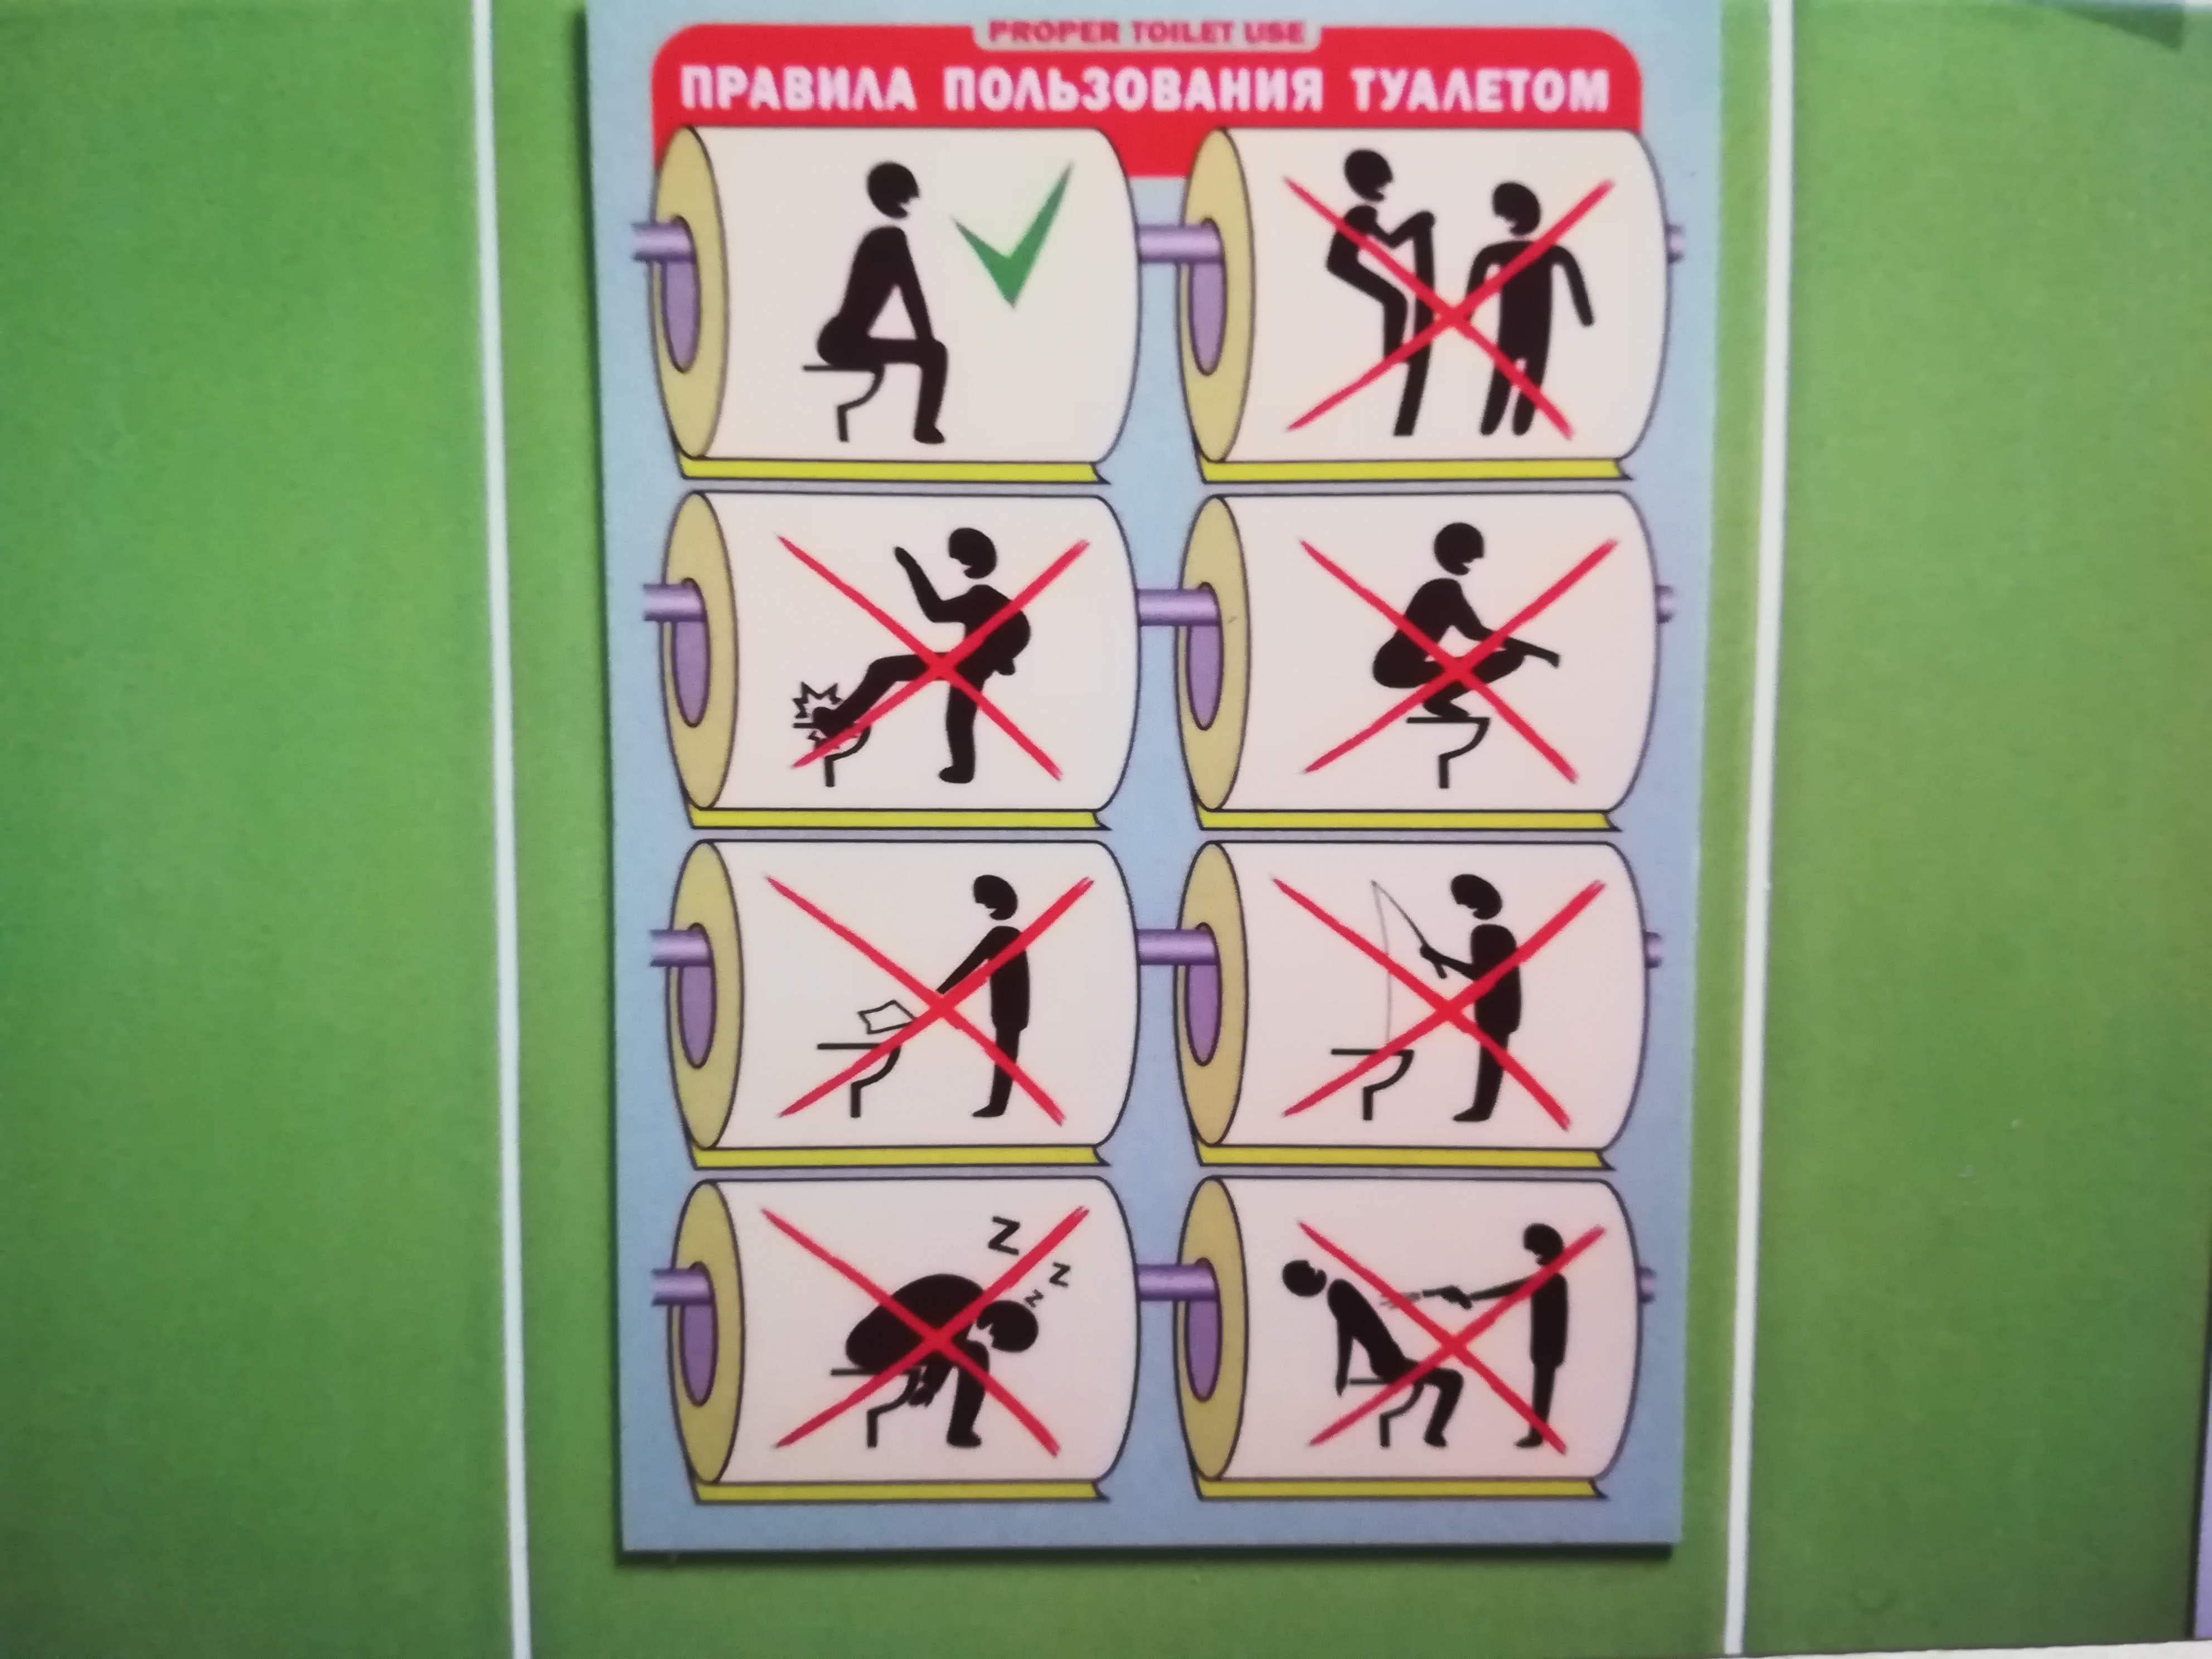 (In russian) "PROPER TOILET USE": 1: Sit correctly ✓. 2: Locking up the separation wall x. 3: Kicking the toilet x. 4: Stand up on the toilet x. 5: Throwing paper to the toilet x. 6: Fishing in the toilet x. 7: Sleeping on the toilet. 8: Shooting people who use the toilet. 